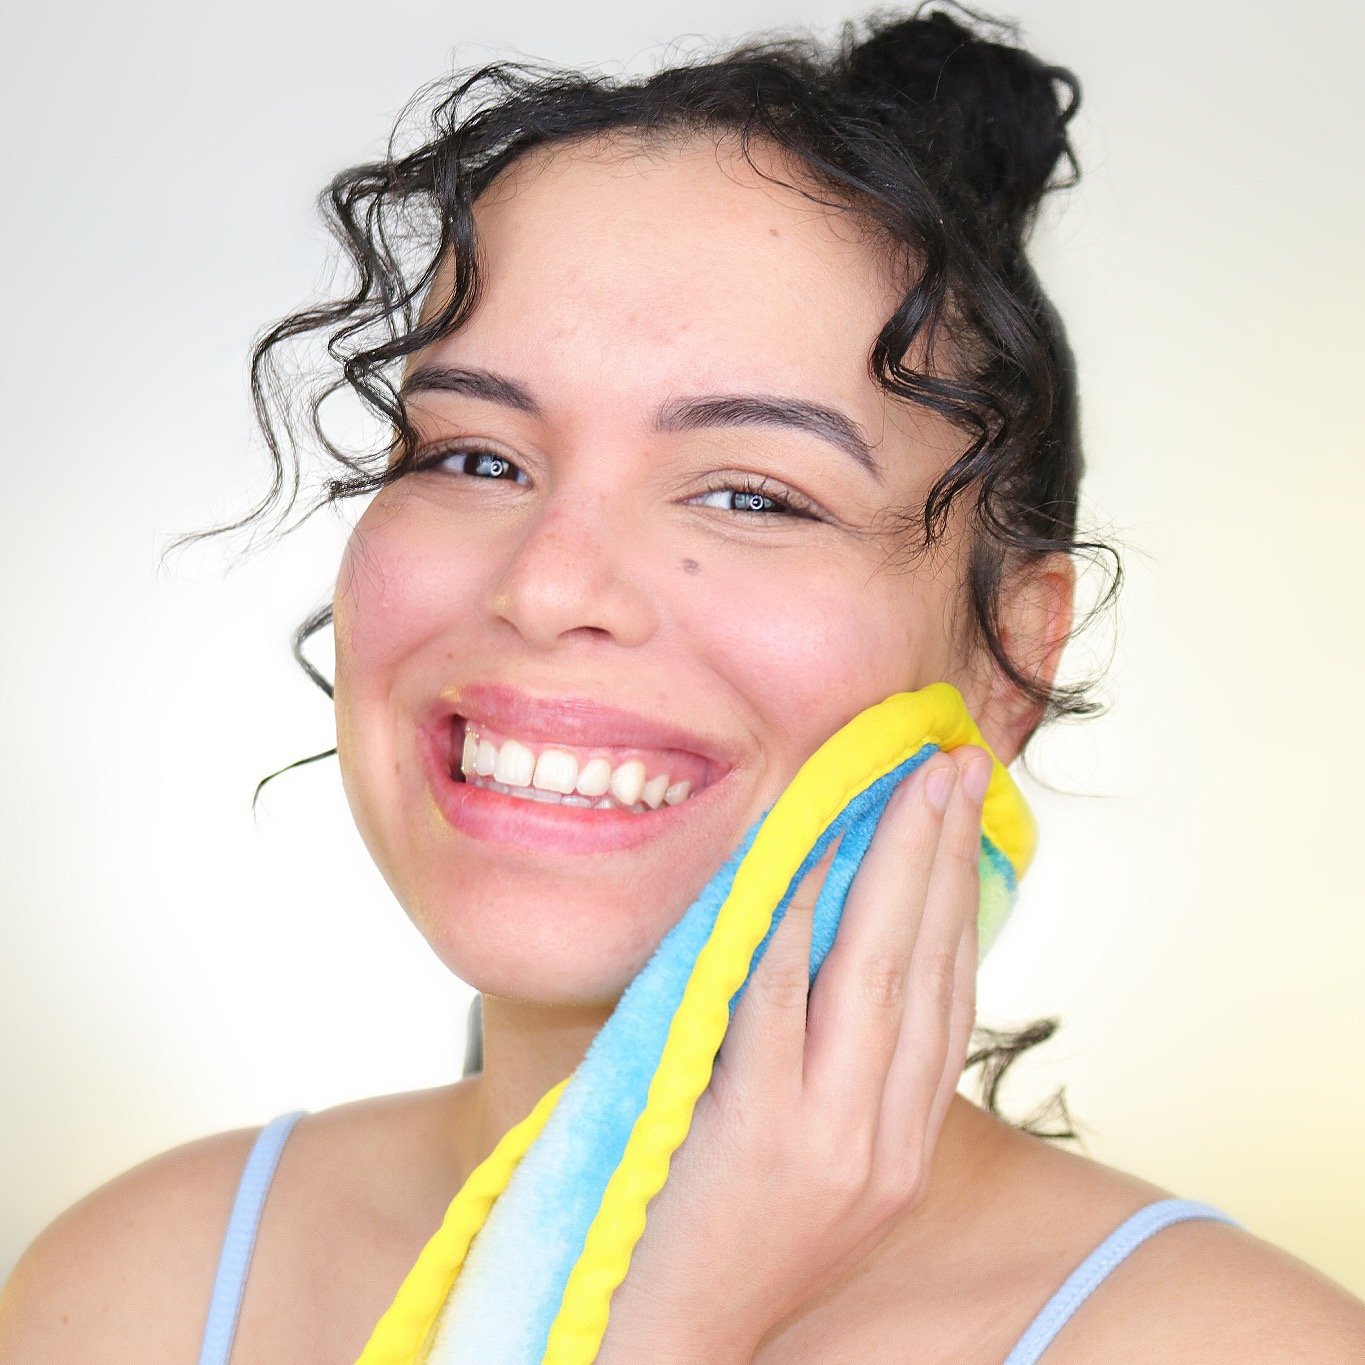 Woman smiling and holding charity: water MakeUp Eraser up to her face.